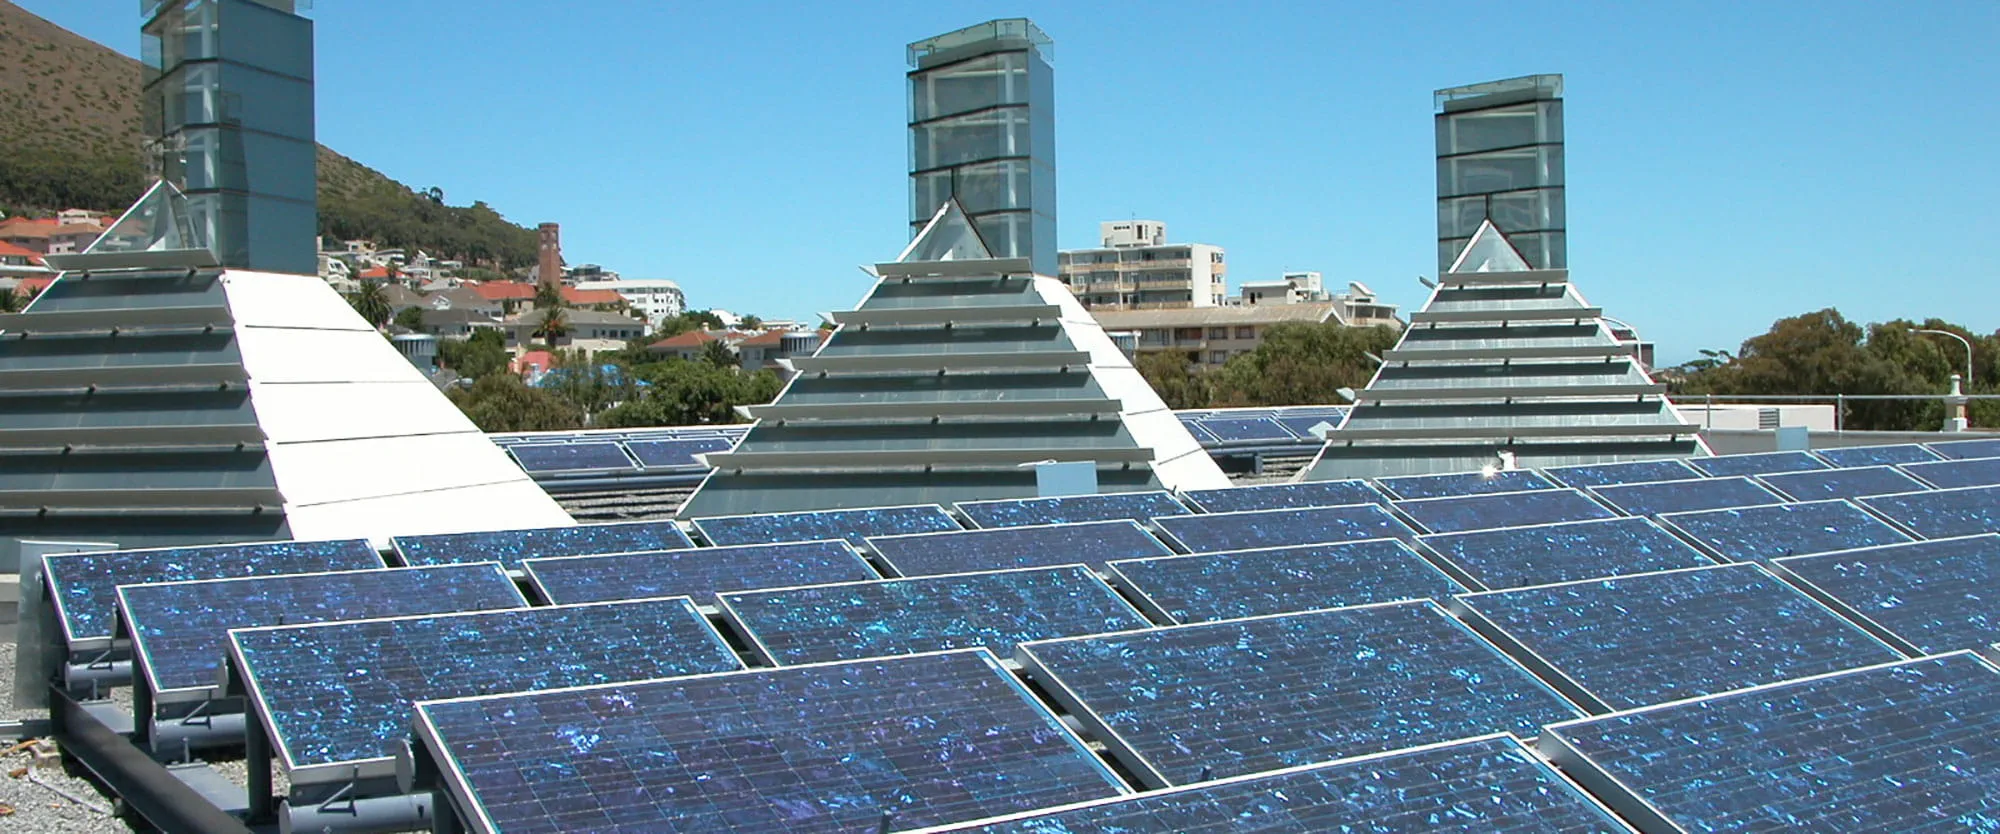 Photo voltaic panels on BP headquarters building in Cape Town, South Africa